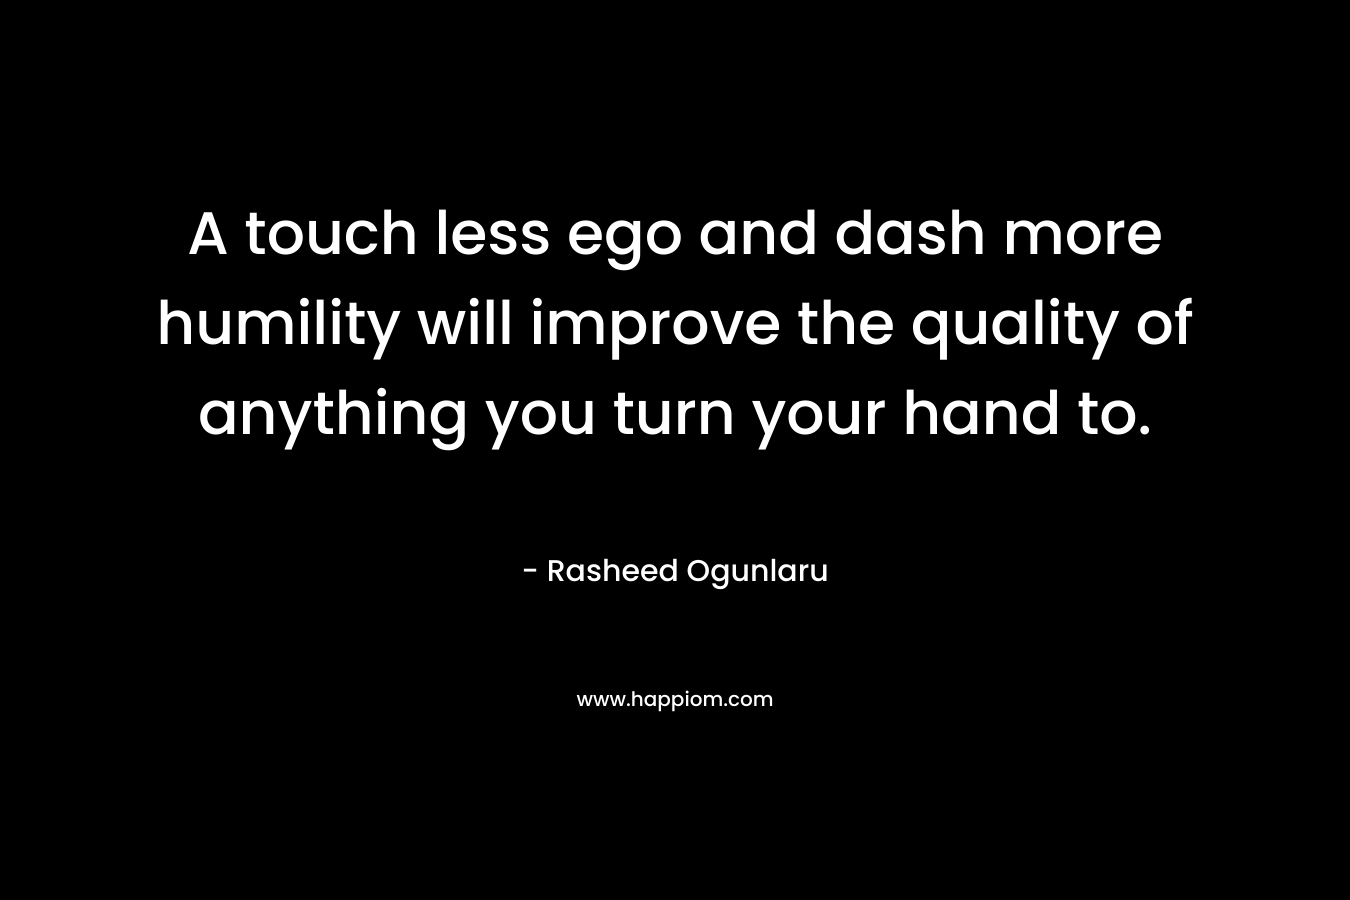 A touch less ego and dash more humility will improve the quality of anything you turn your hand to. – Rasheed Ogunlaru